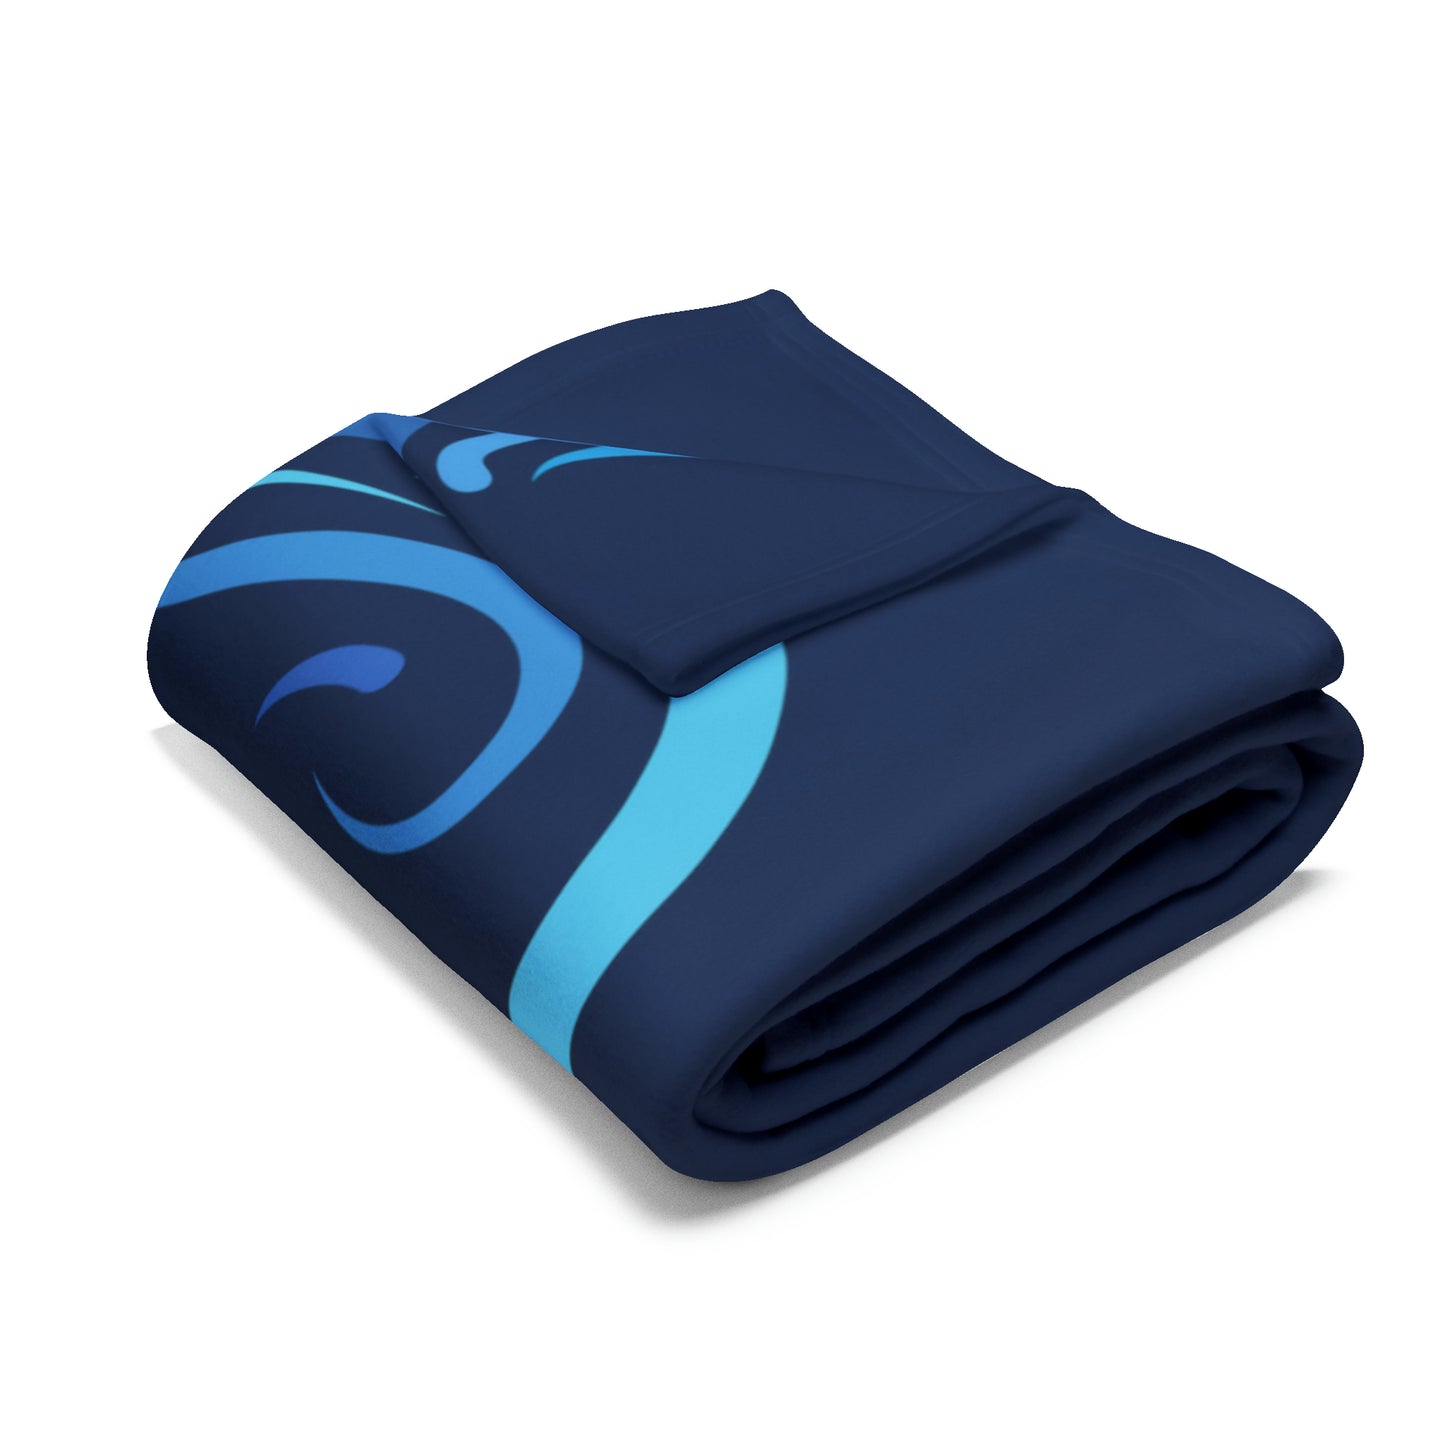 Personalized Blanket Gift for Swimmer